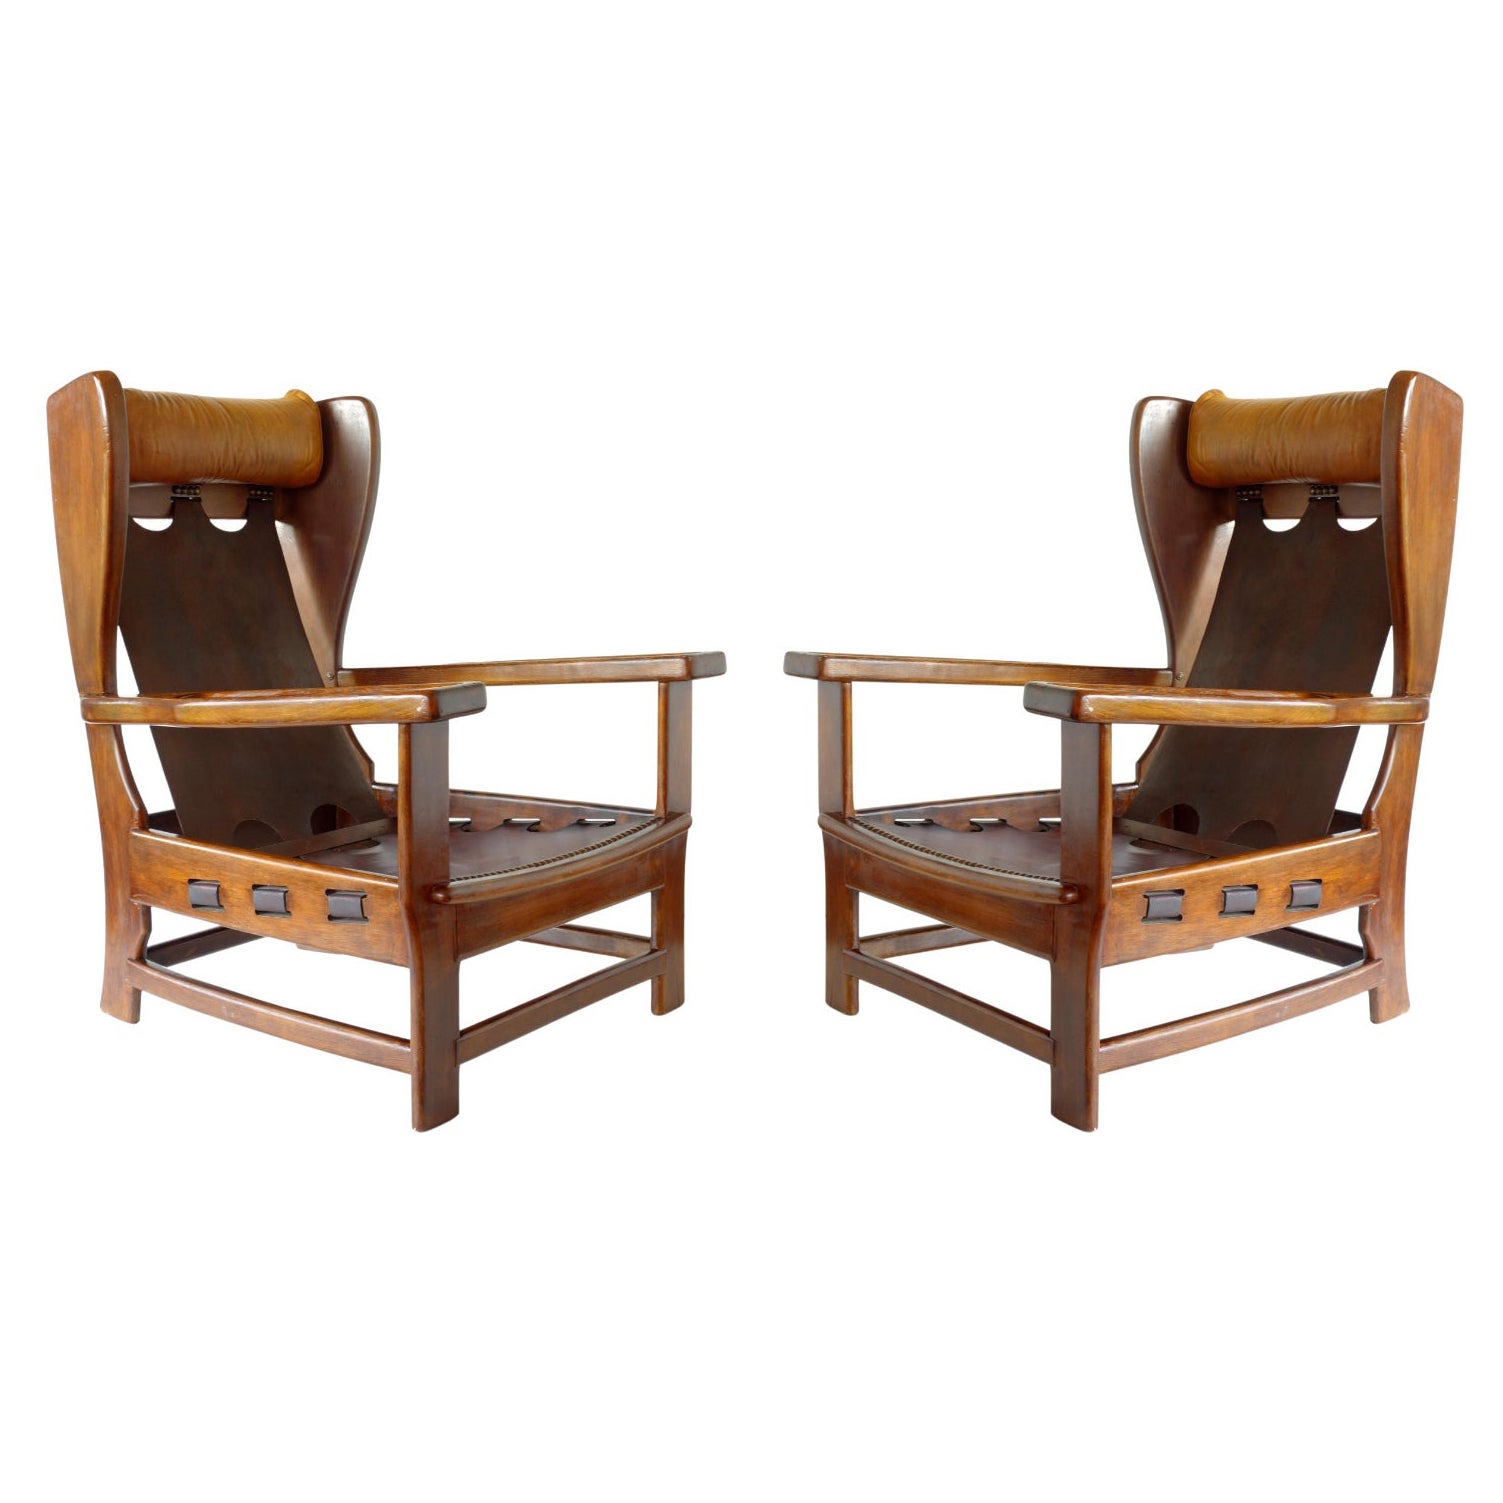 1960s Italian Design Leather and Wood Pair of Armchairs For Sale